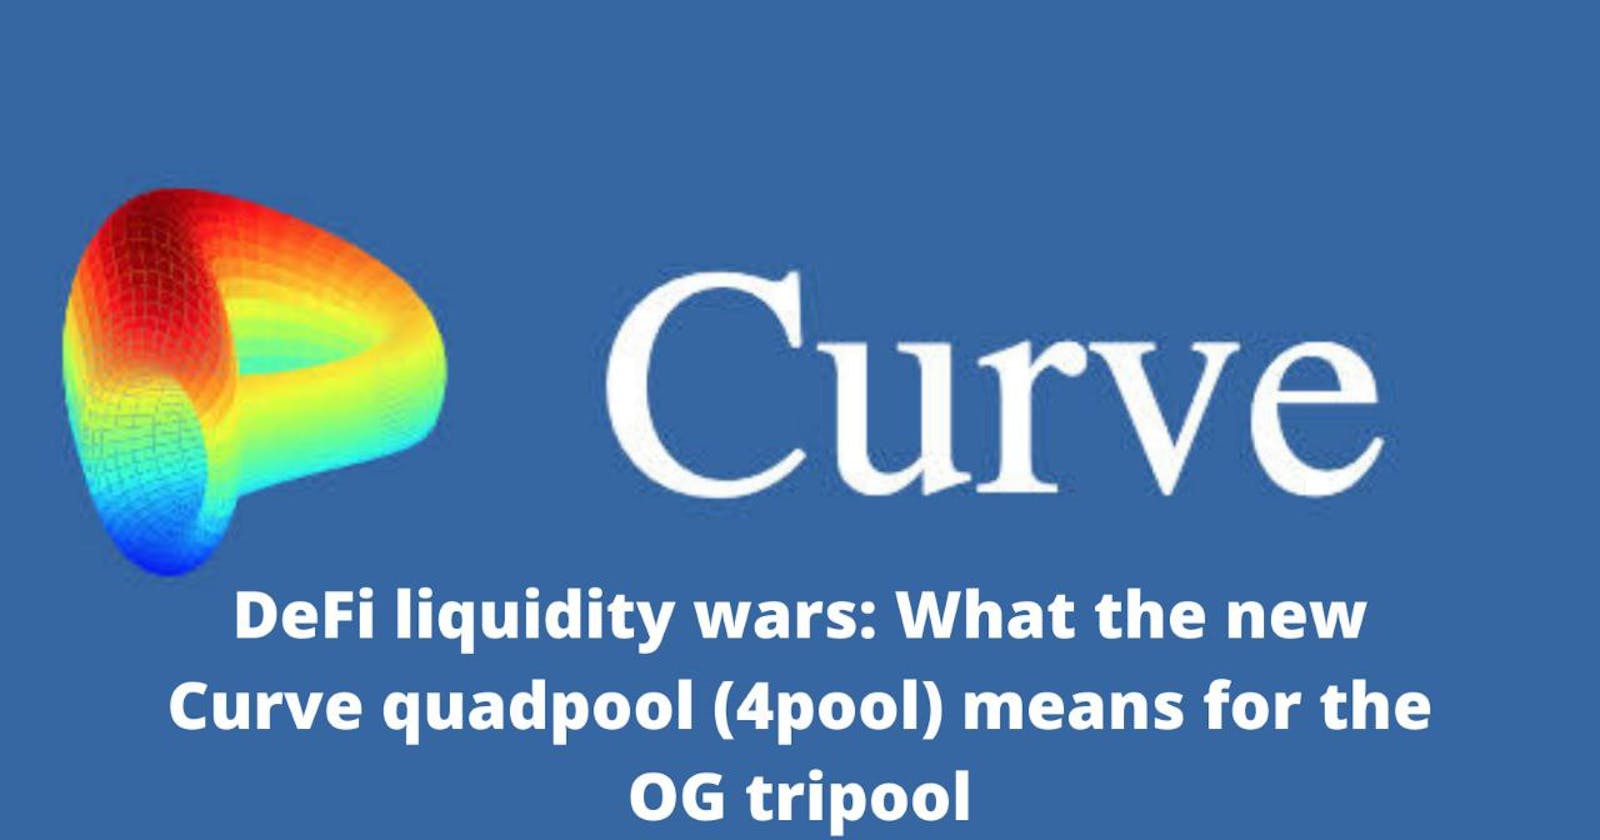 DeFi liquidity wars: What does the new Curve quadpool (4pool) mean for the OG tripool?